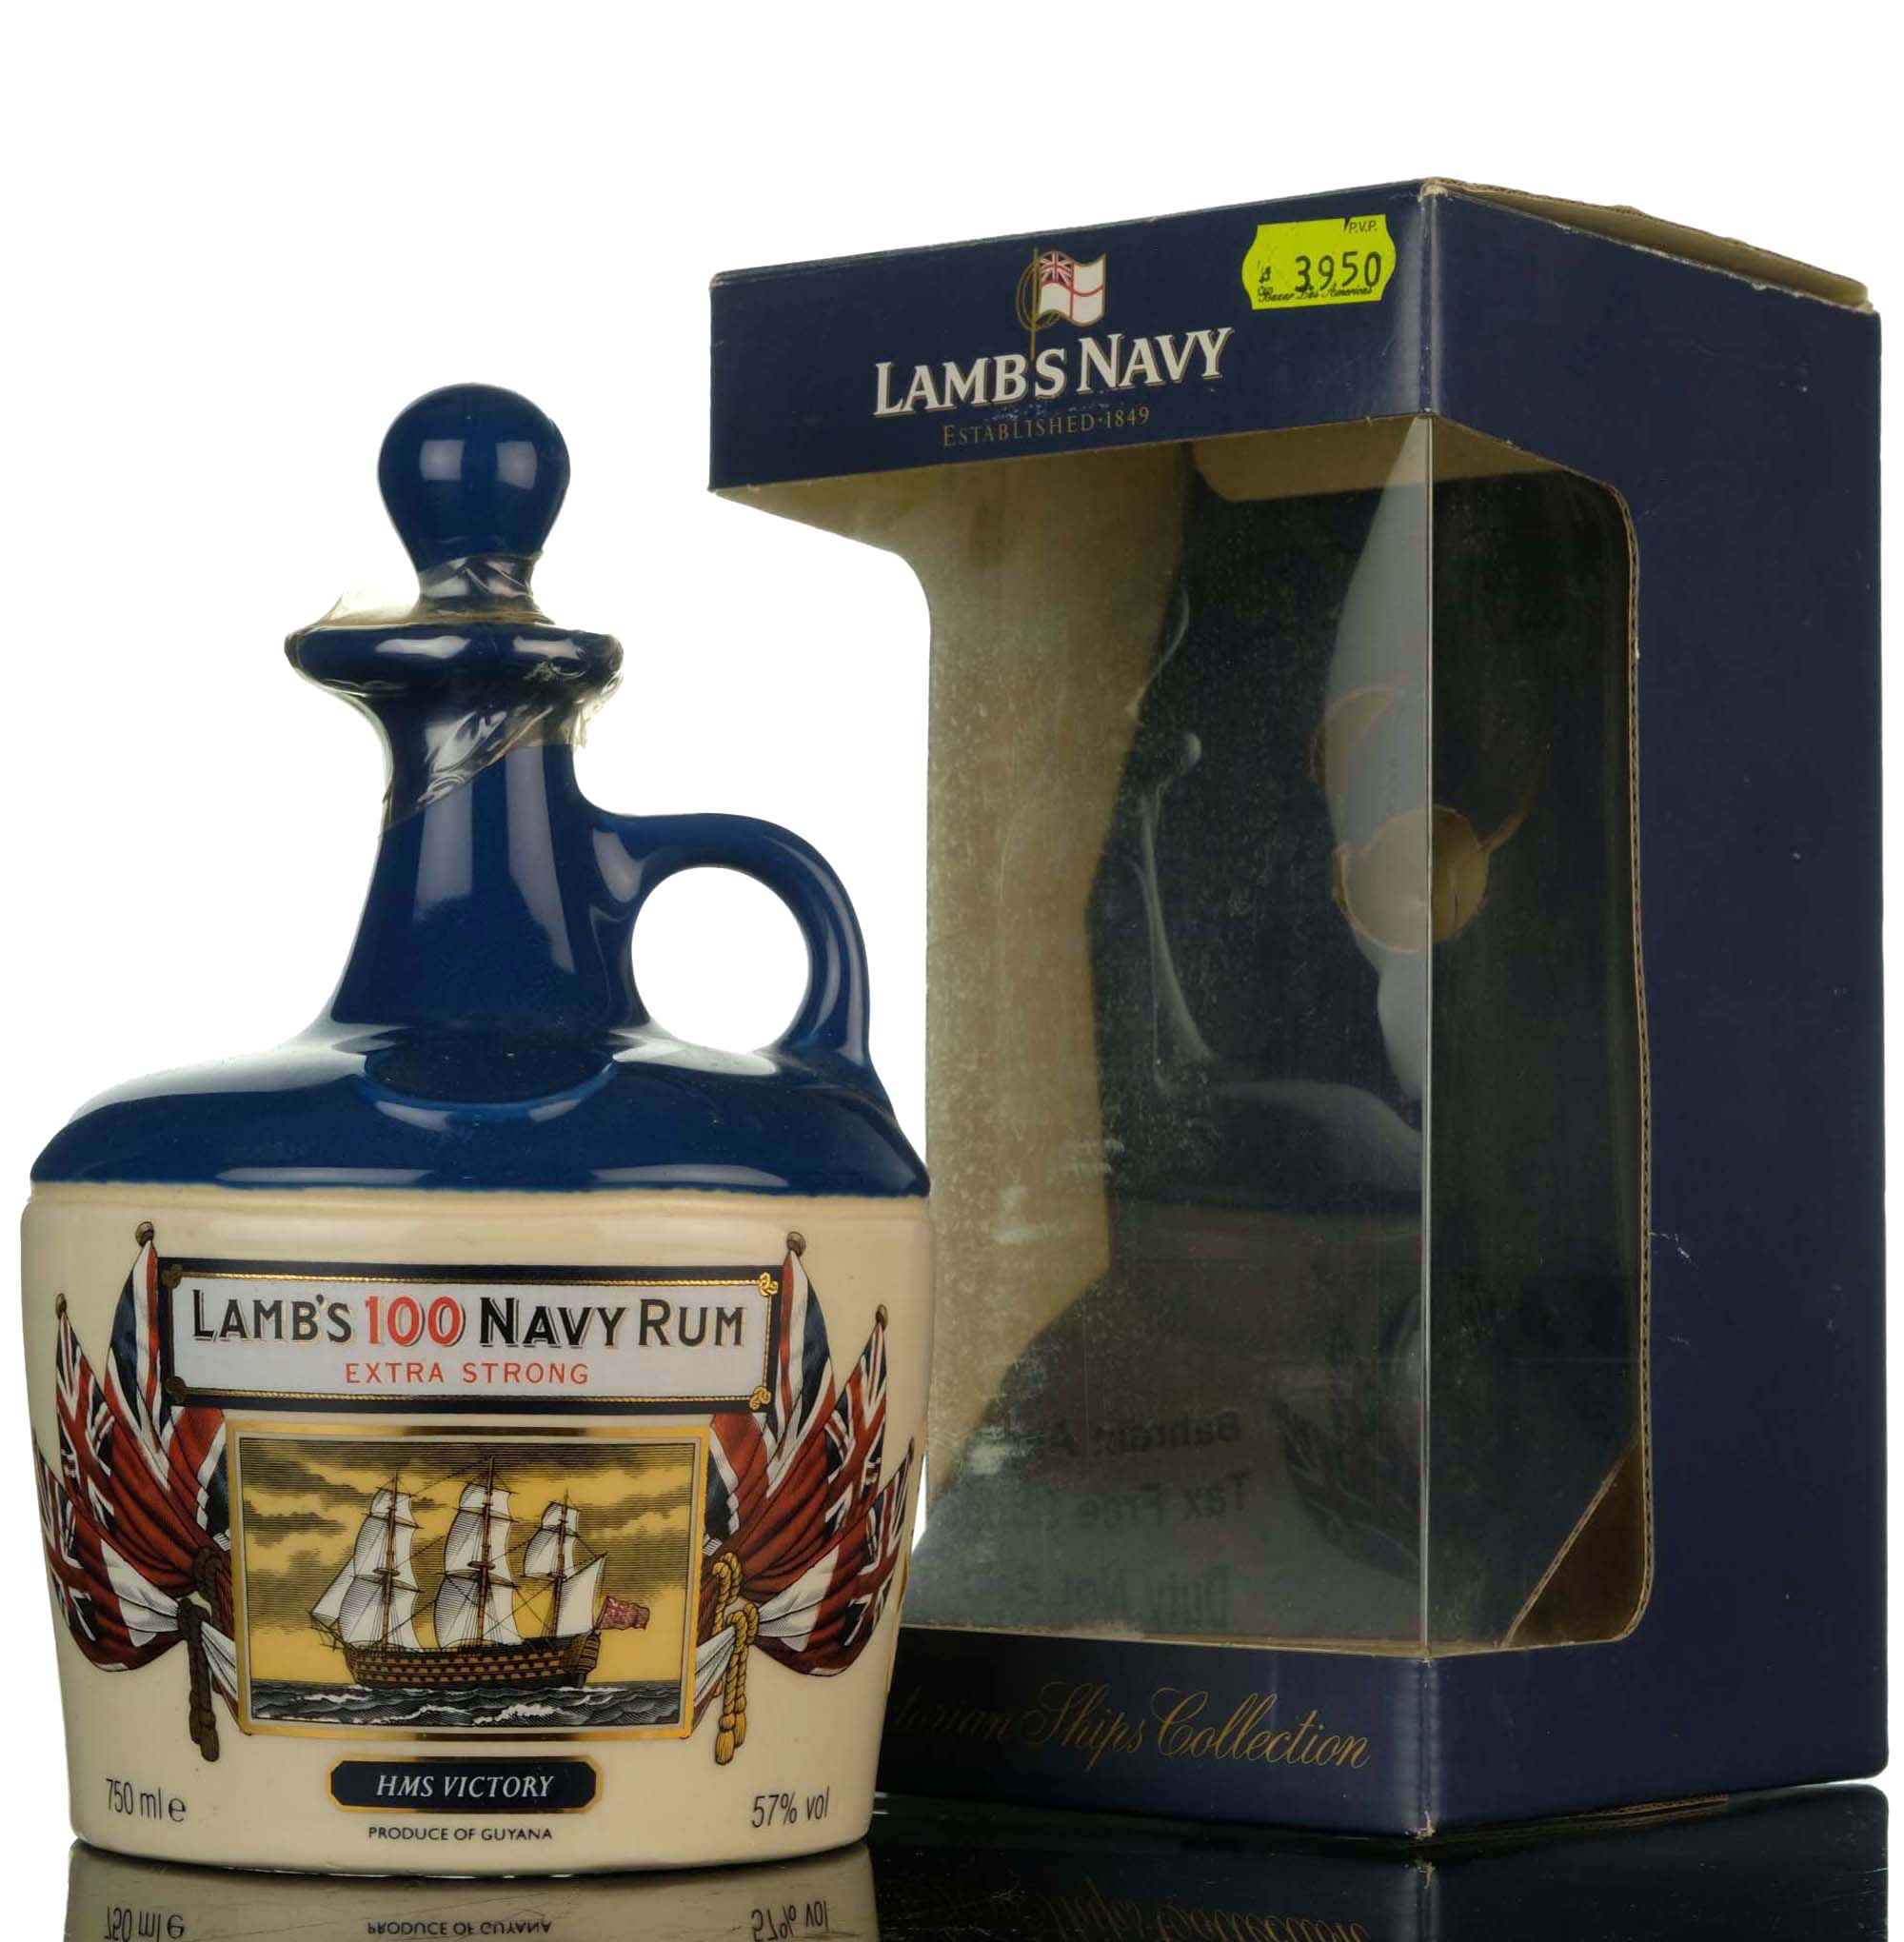 Lambs Navy Rum - The Alfred Lambs Victorian Ships Collection - HMS Victory - 100 Proof - C